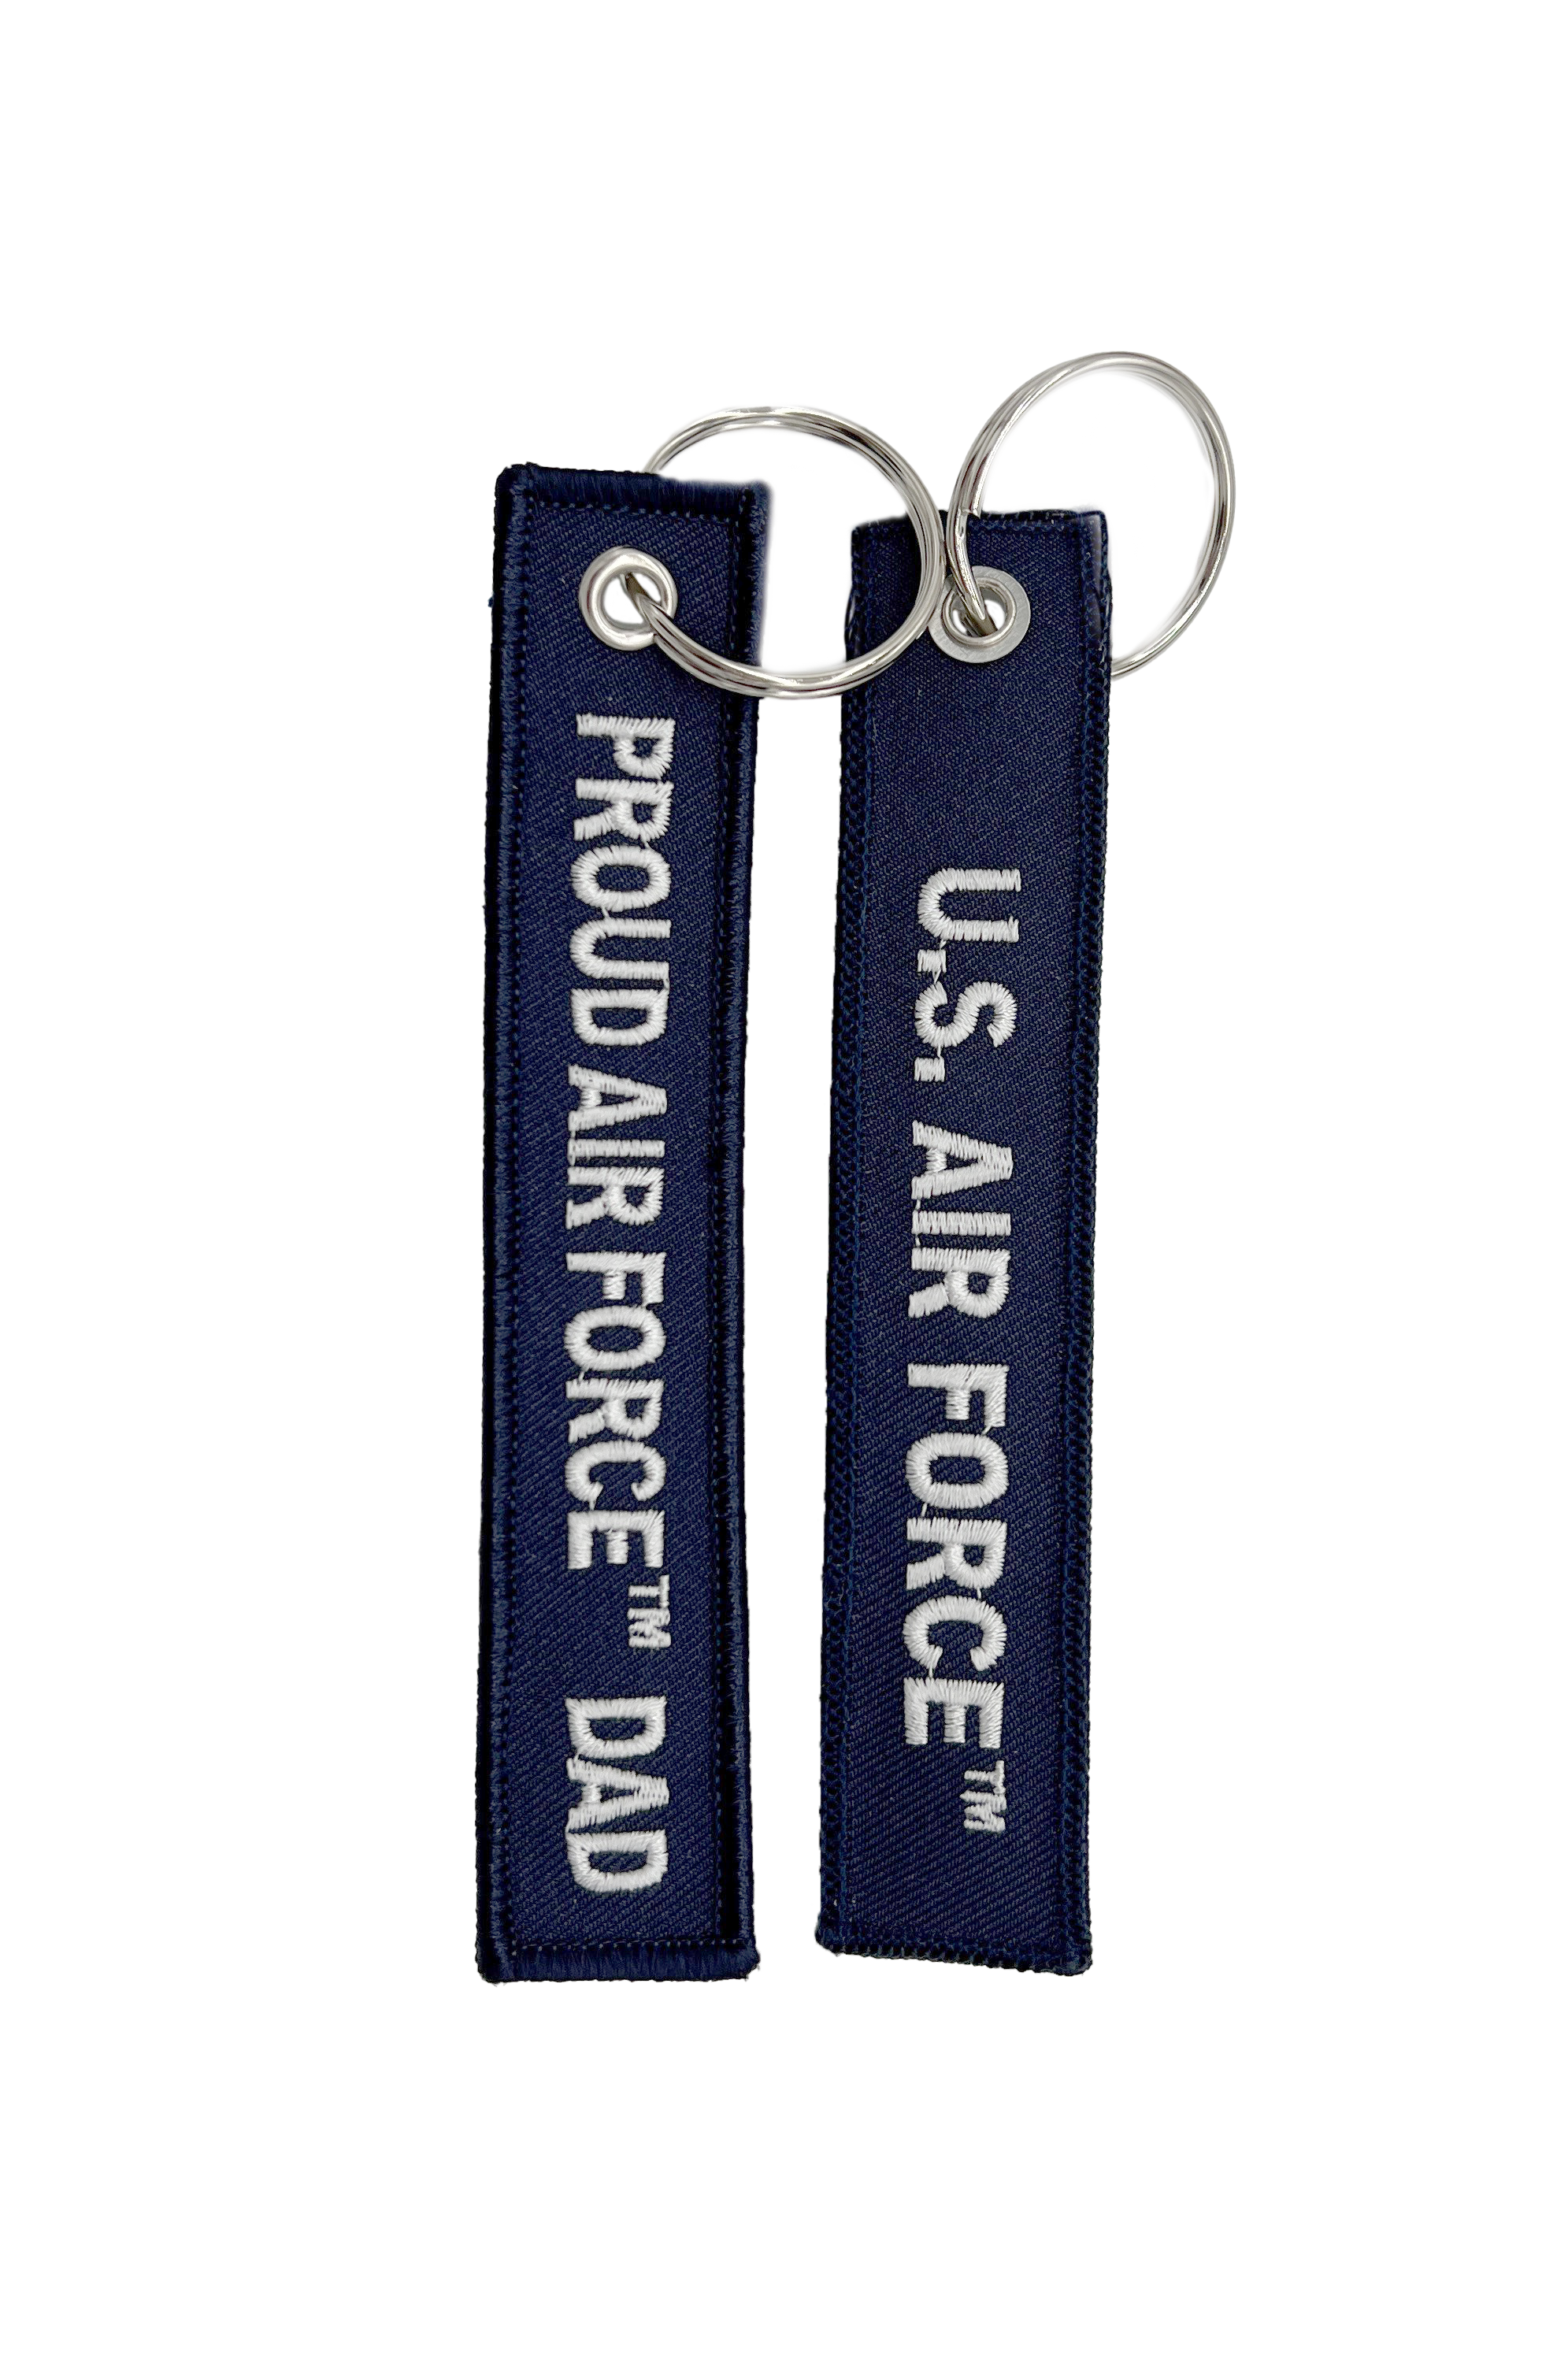 KEYCHAIN-PROUD AIR FORCE DAD 5 3 / 4"x1"